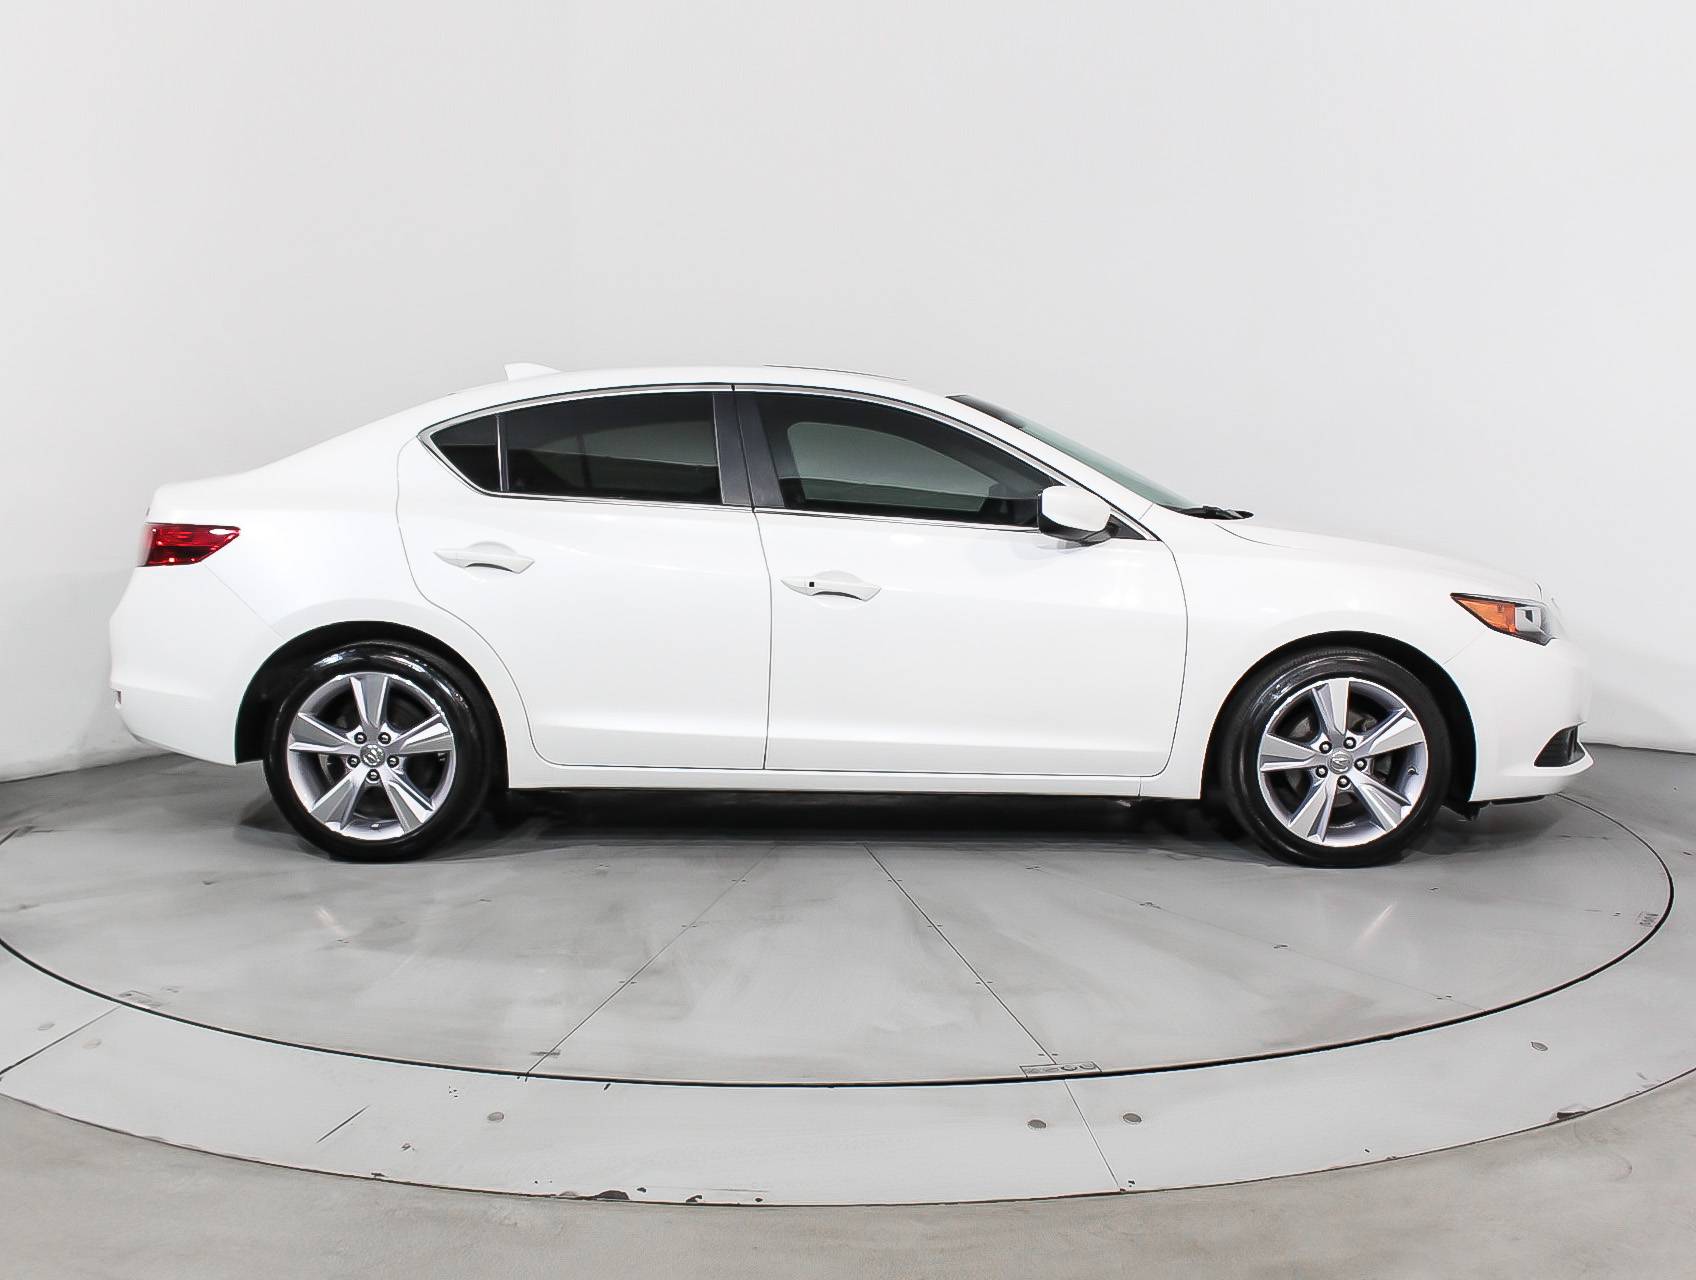 Florida Fine Cars - Used ACURA ILX 2014 MARGATE TECHNOLOGY PACKAGE